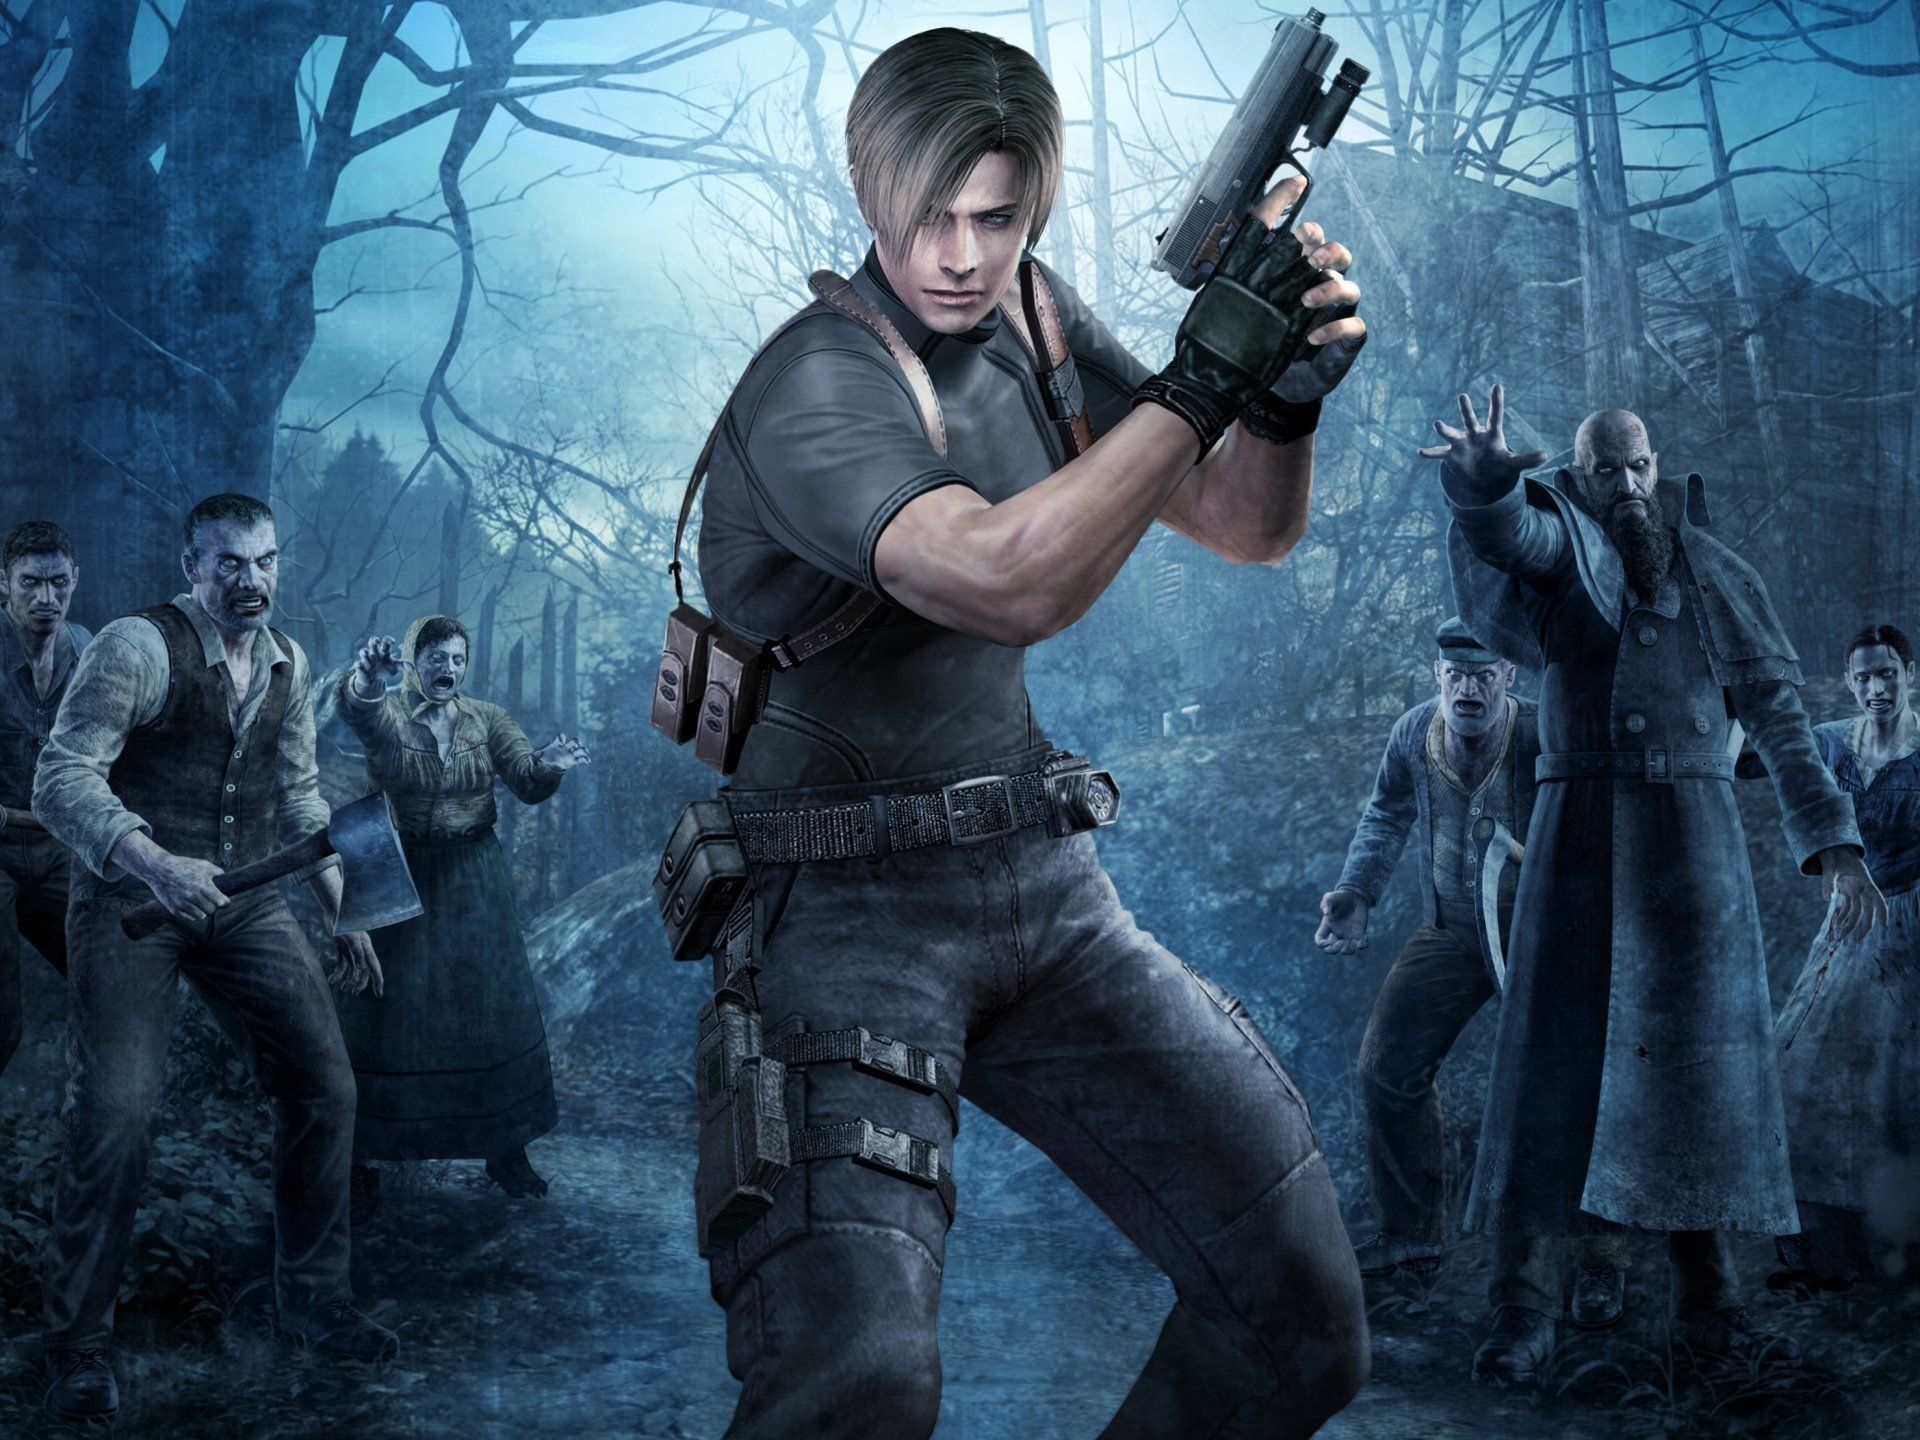 Resident Evil Movies in Order Chronologically and by Release Date